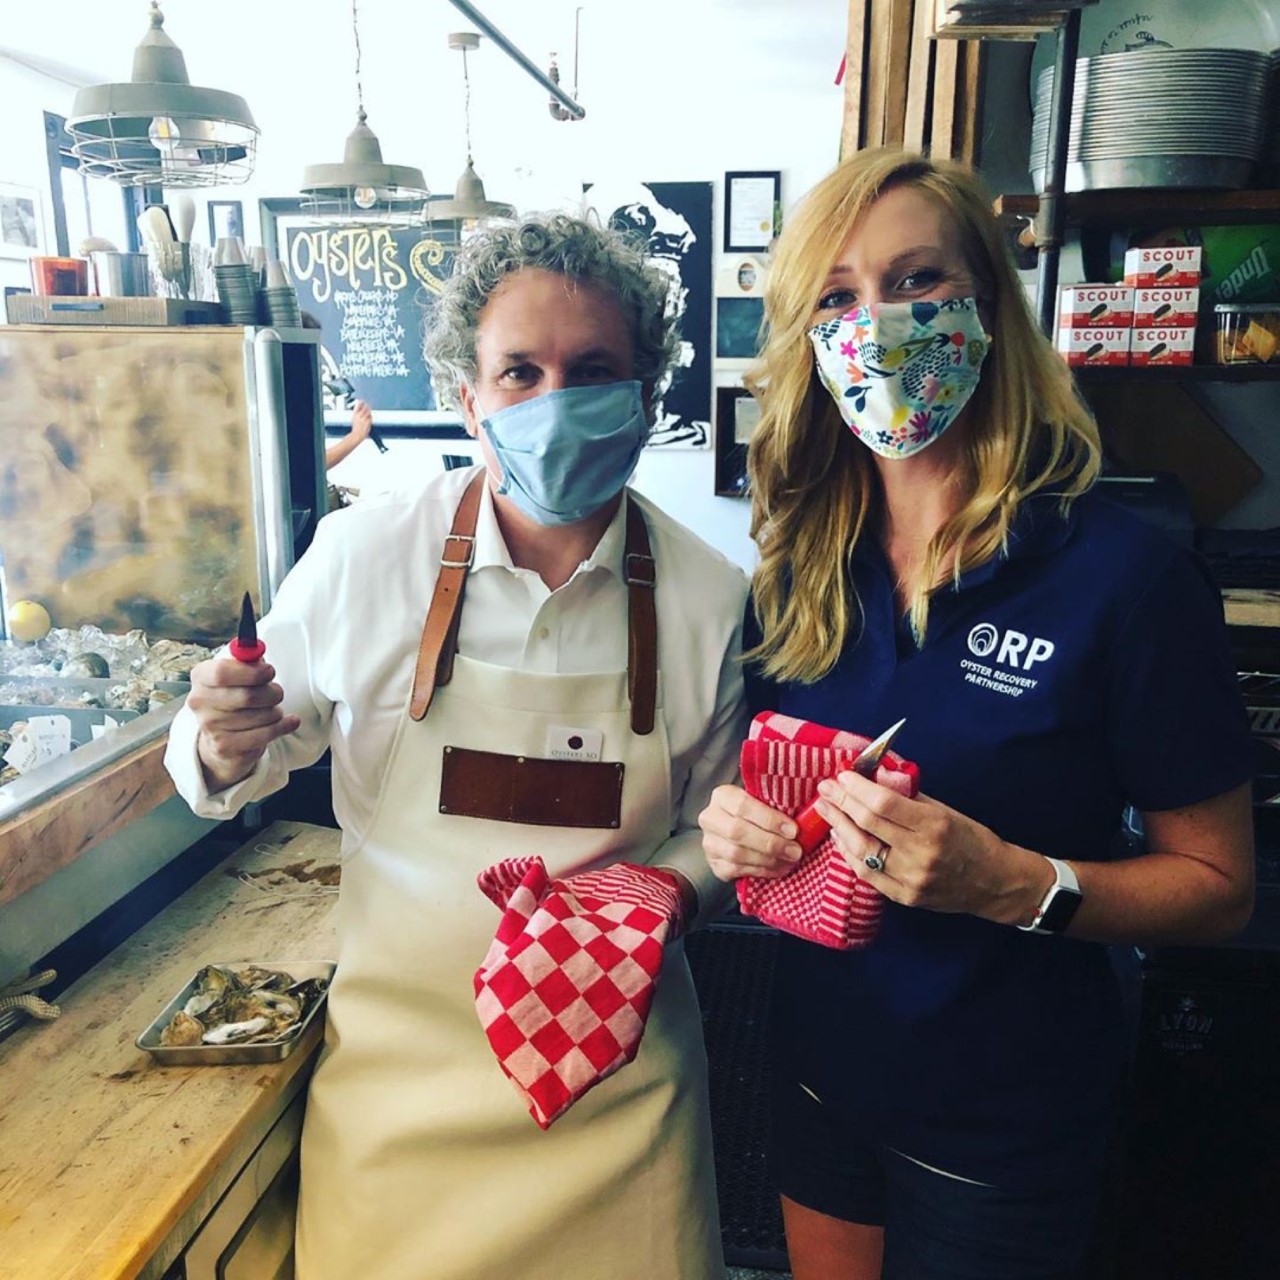 Oysters XO and Oyster Recovery Partnership Aim to Make Shucking Fun and Easy for All